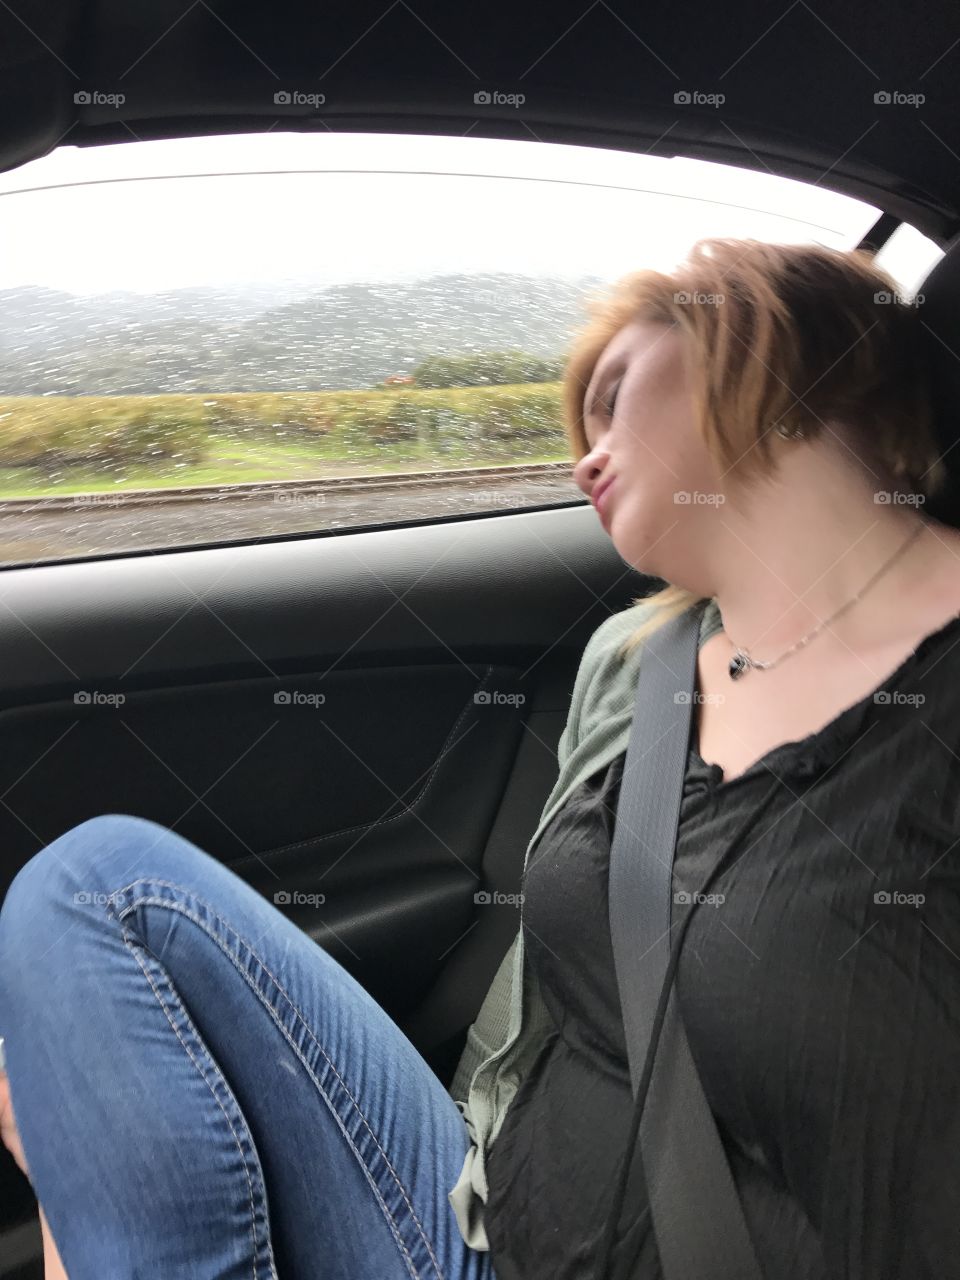 Passed out car rides